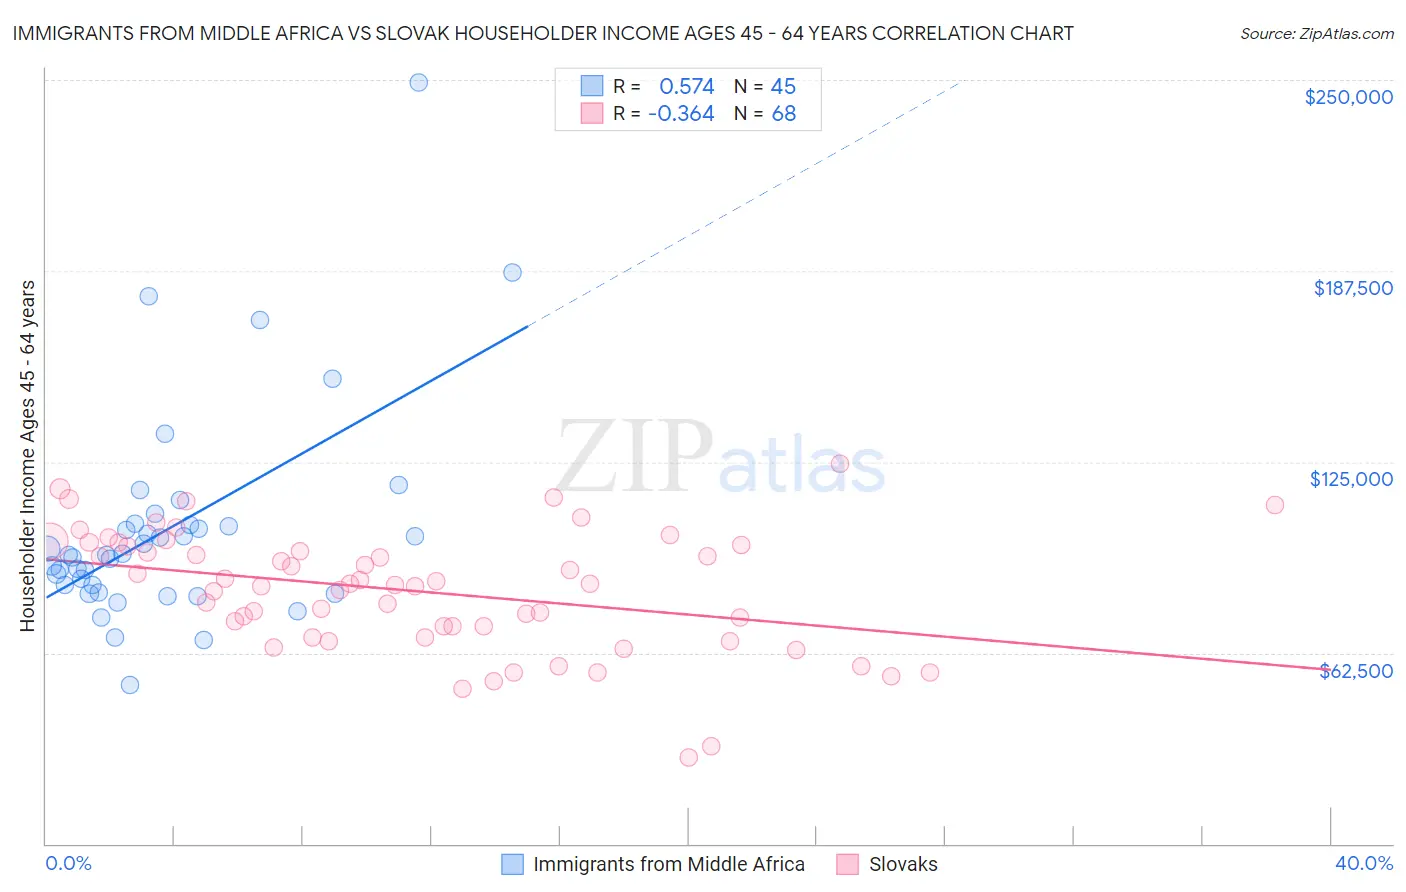 Immigrants from Middle Africa vs Slovak Householder Income Ages 45 - 64 years